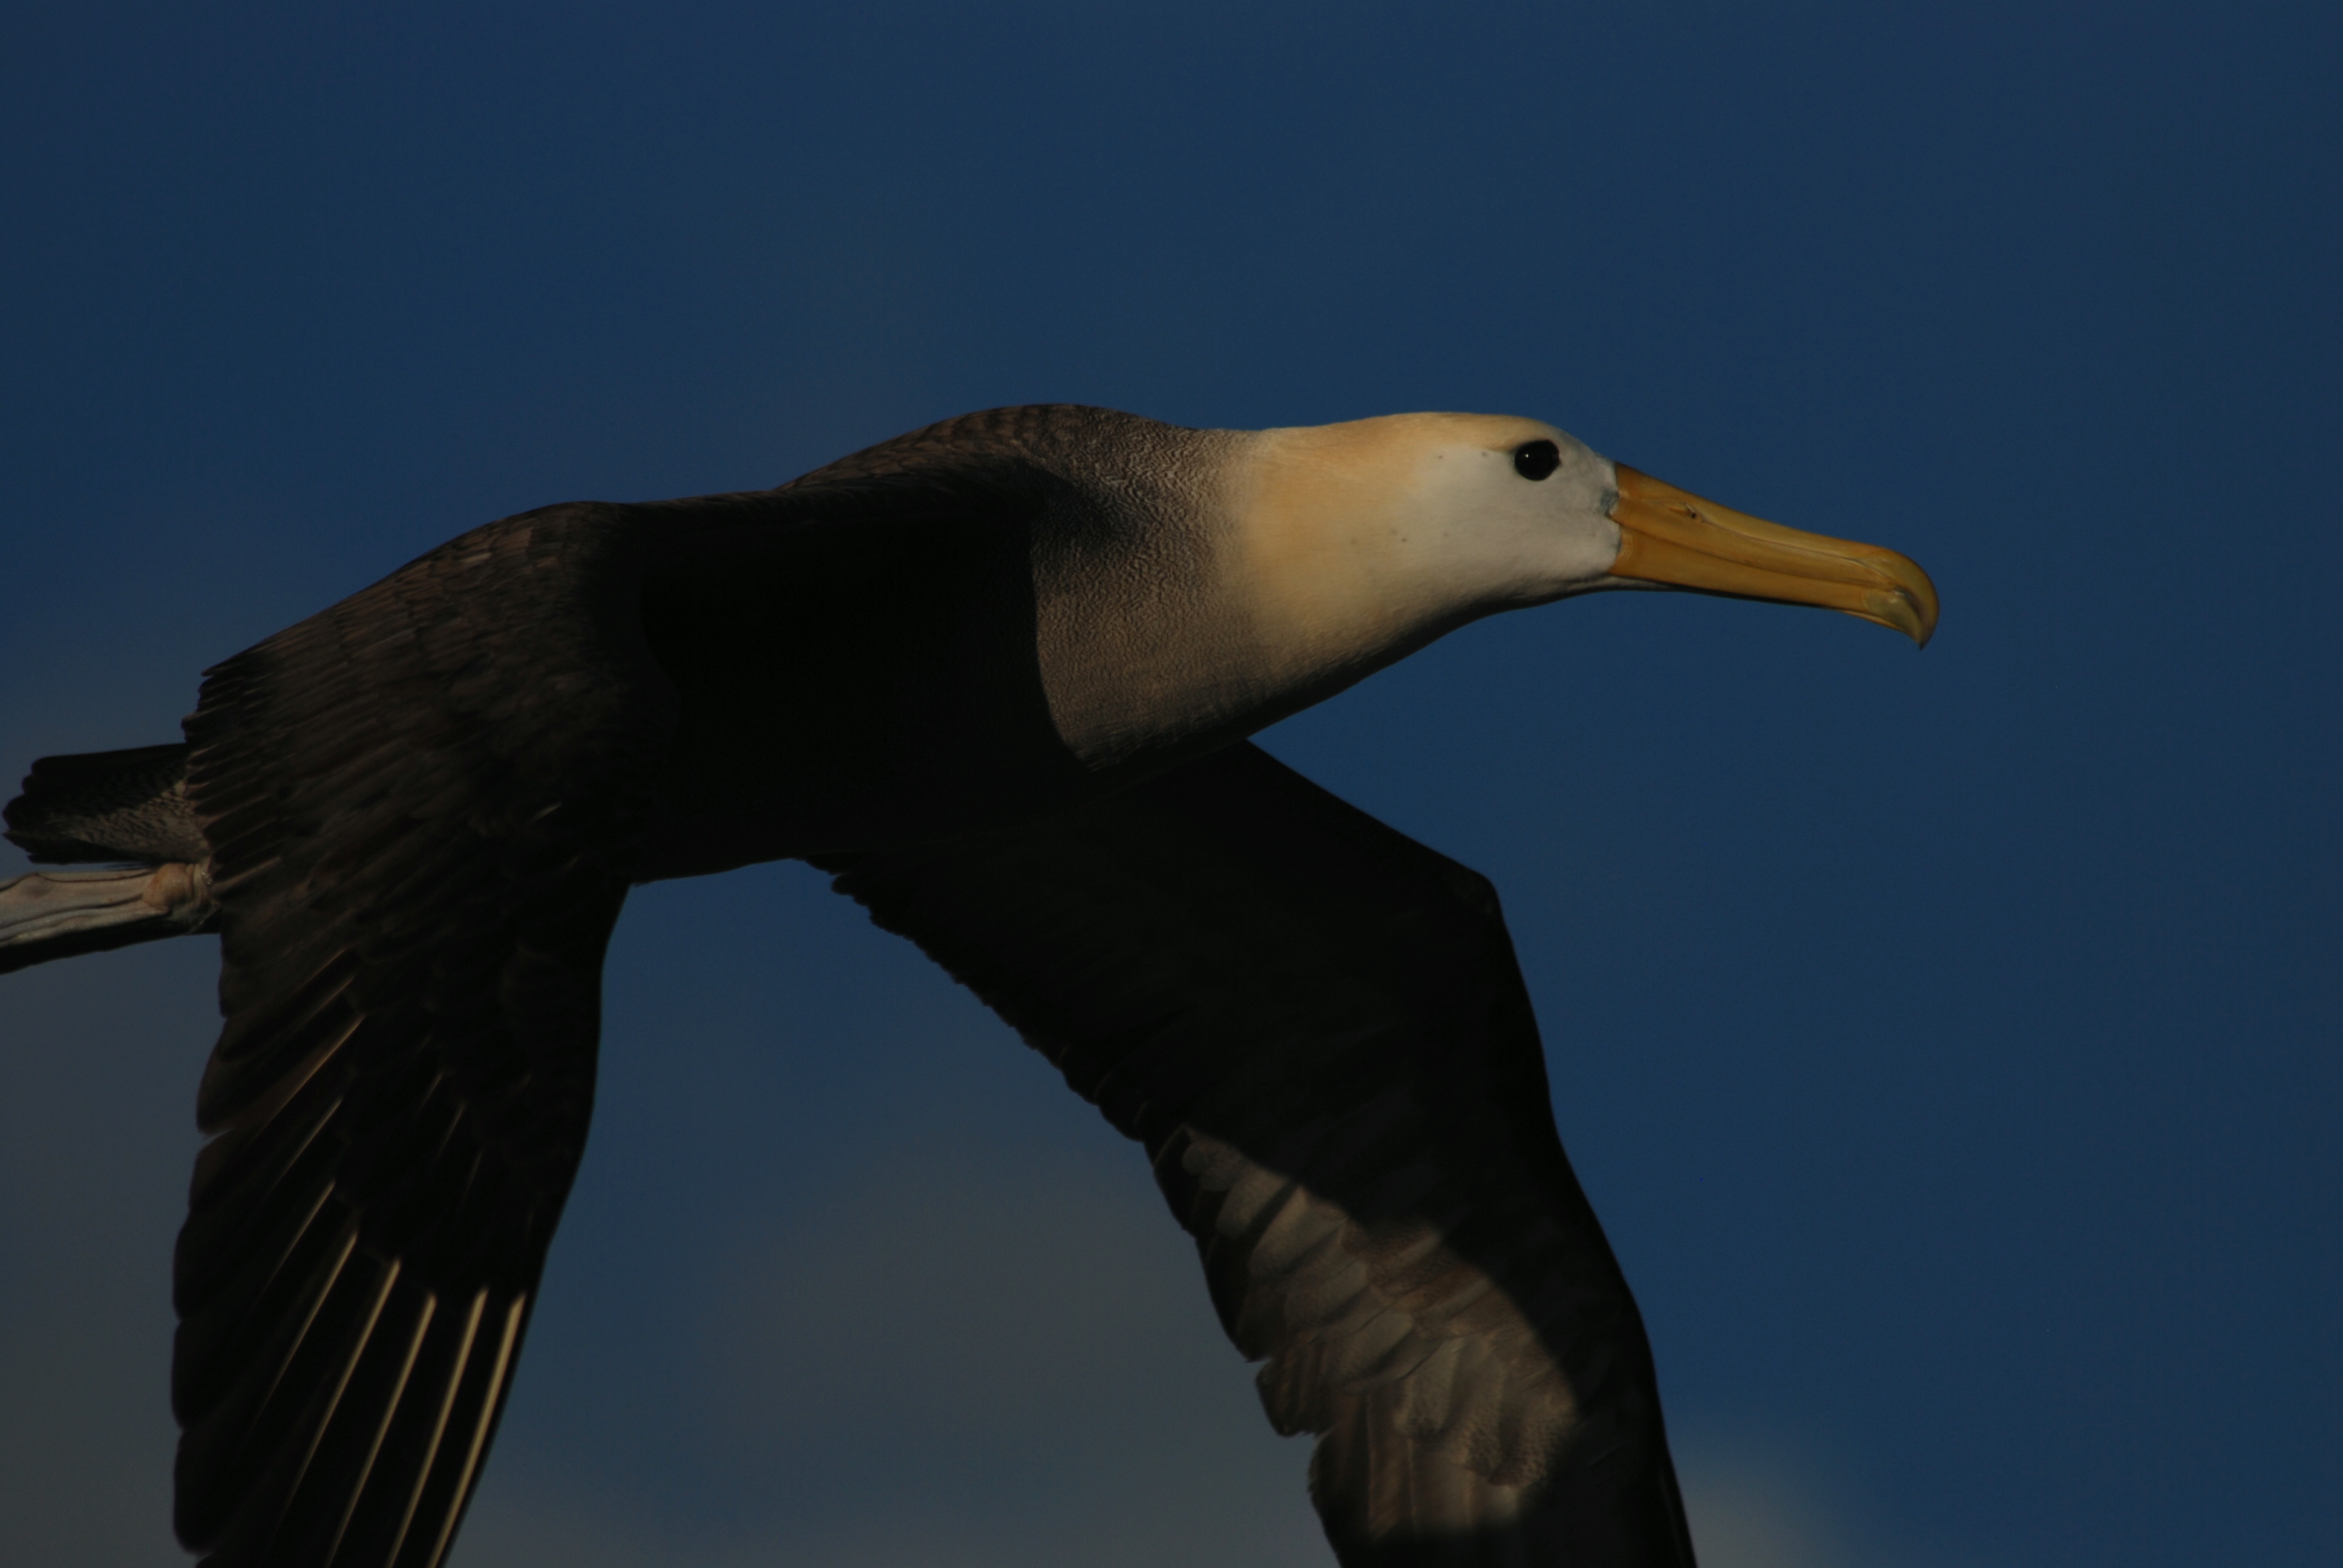 Click picture to see more Waved Albatrosses.